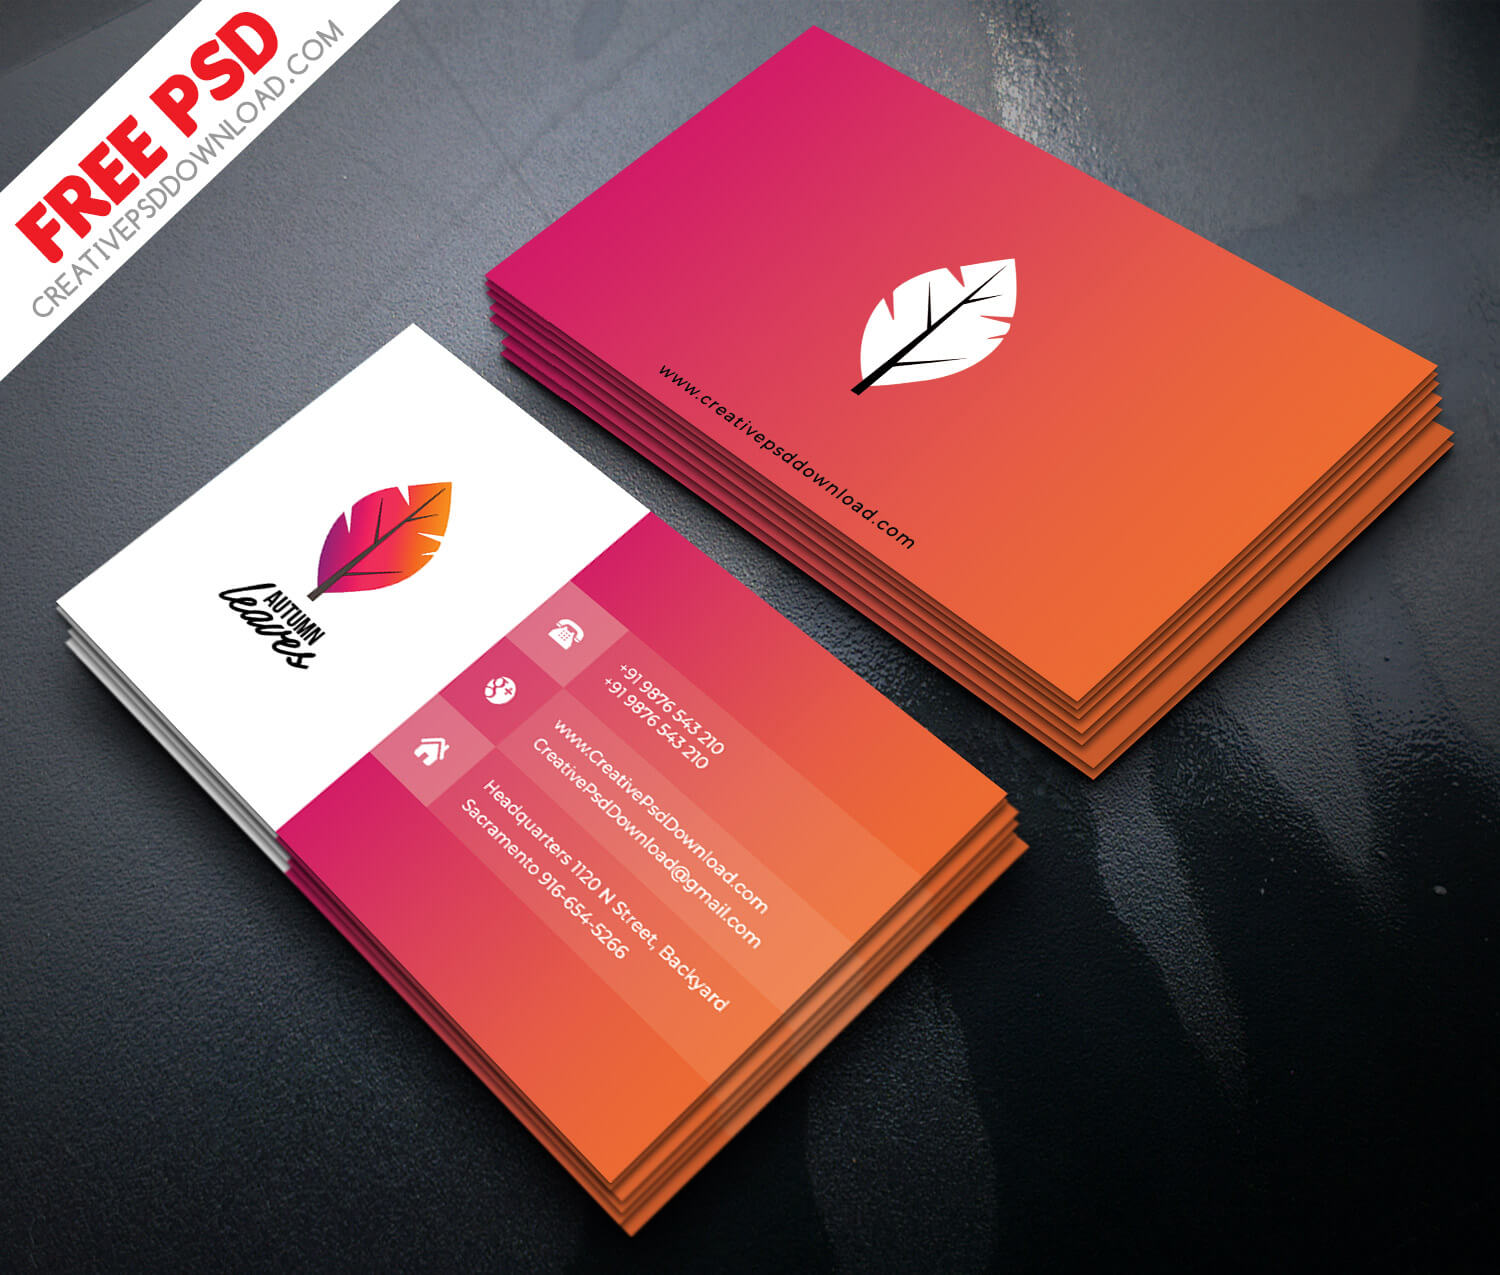 035-blank-business-card-template-psd-download-ideas-intended-for-blank